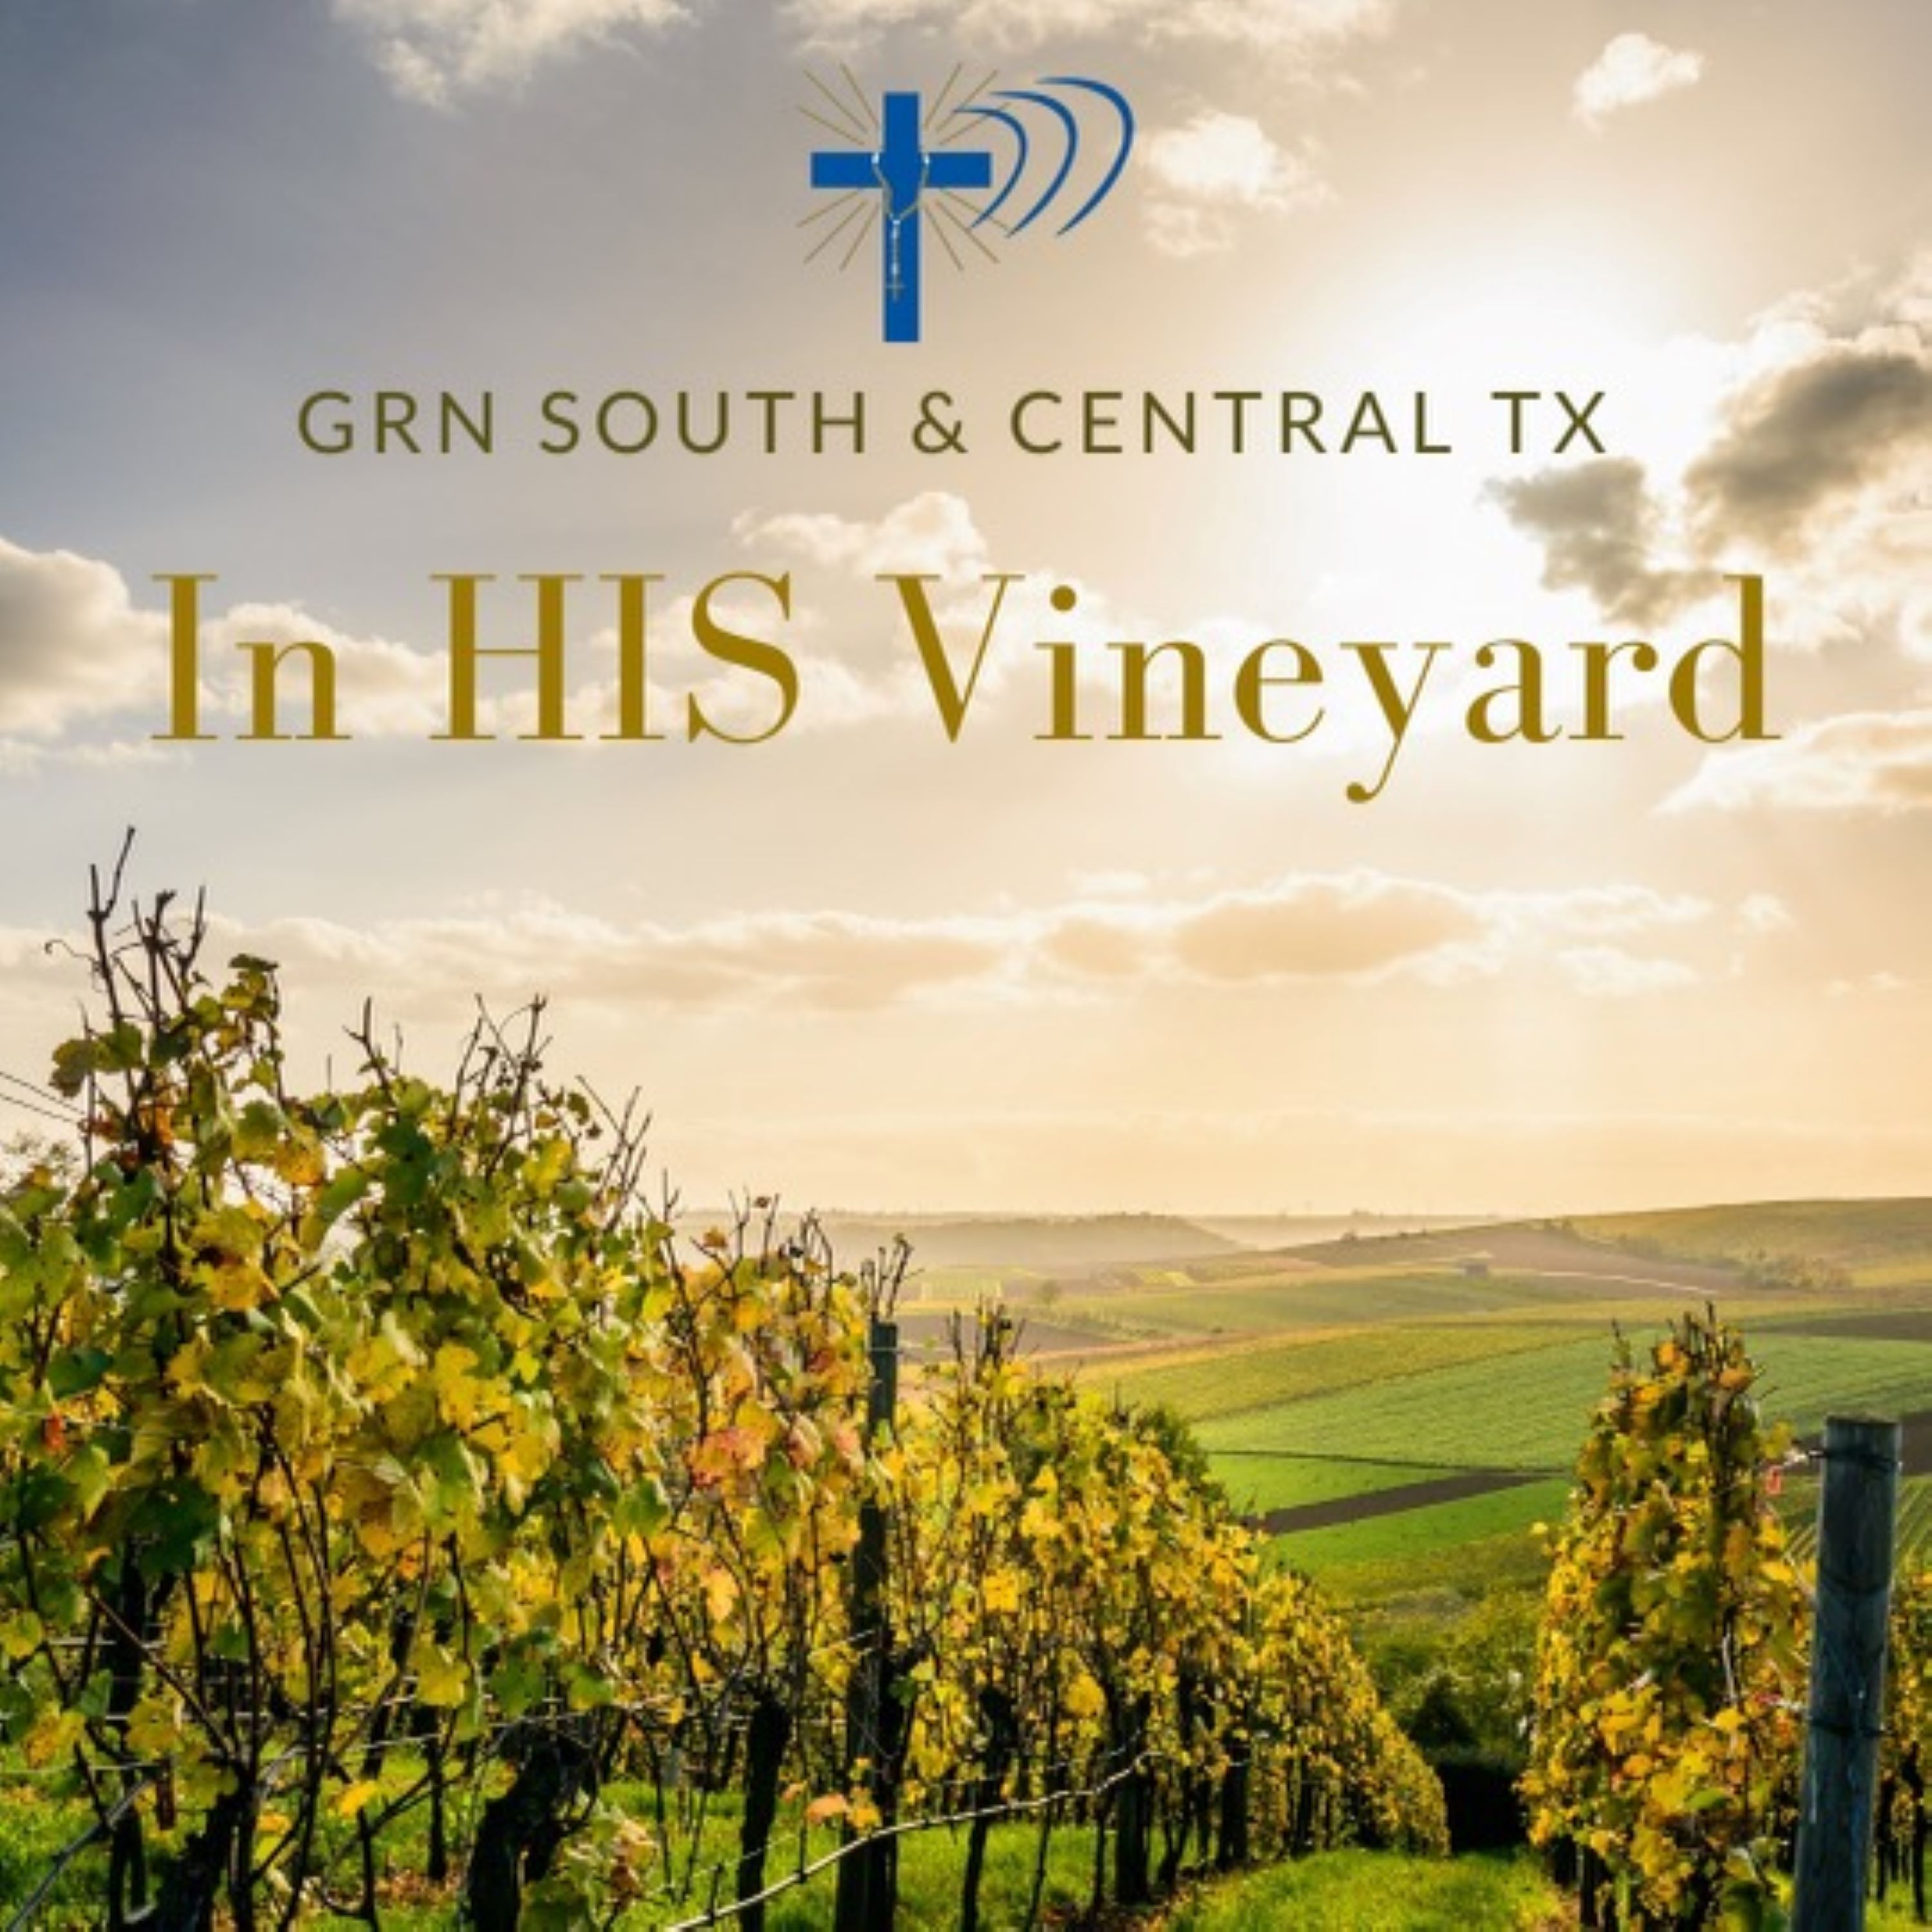 In HIS Vineyard - Monday February 27, 2023